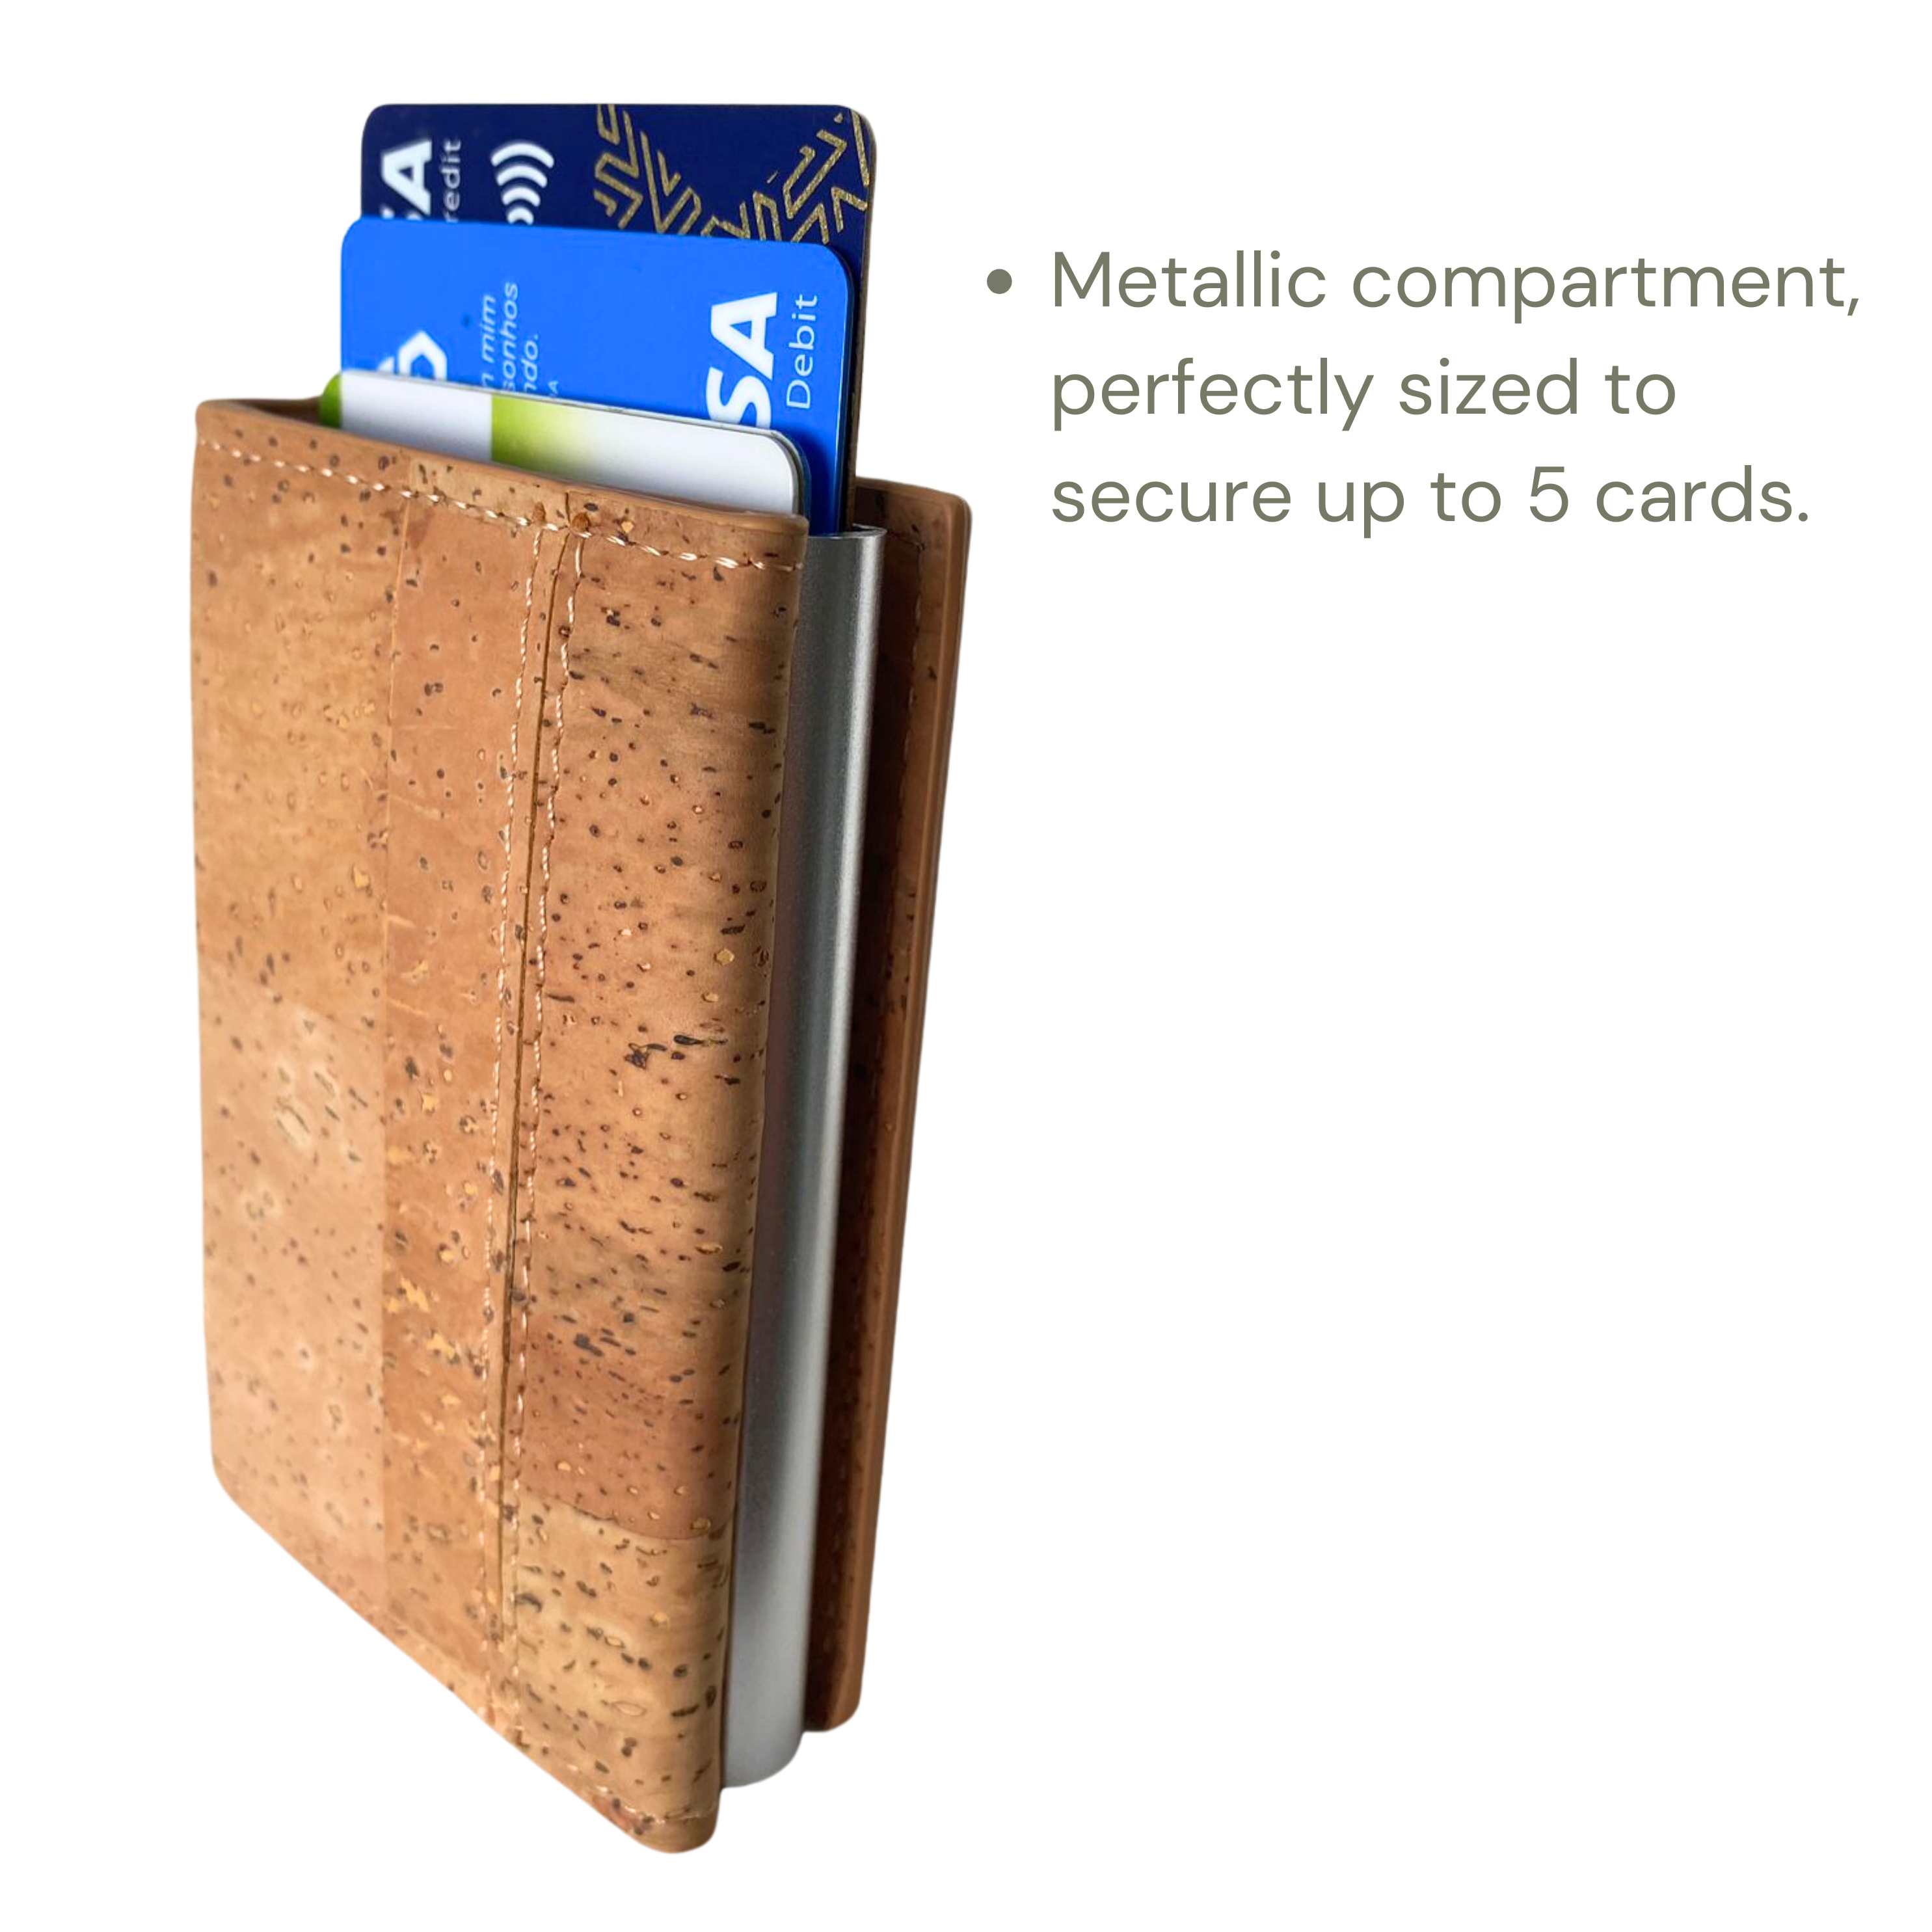 Vegan Cork Wallet with Metallic Card Holder - Sustainable, Slim Design, Handcrafted in Portugal